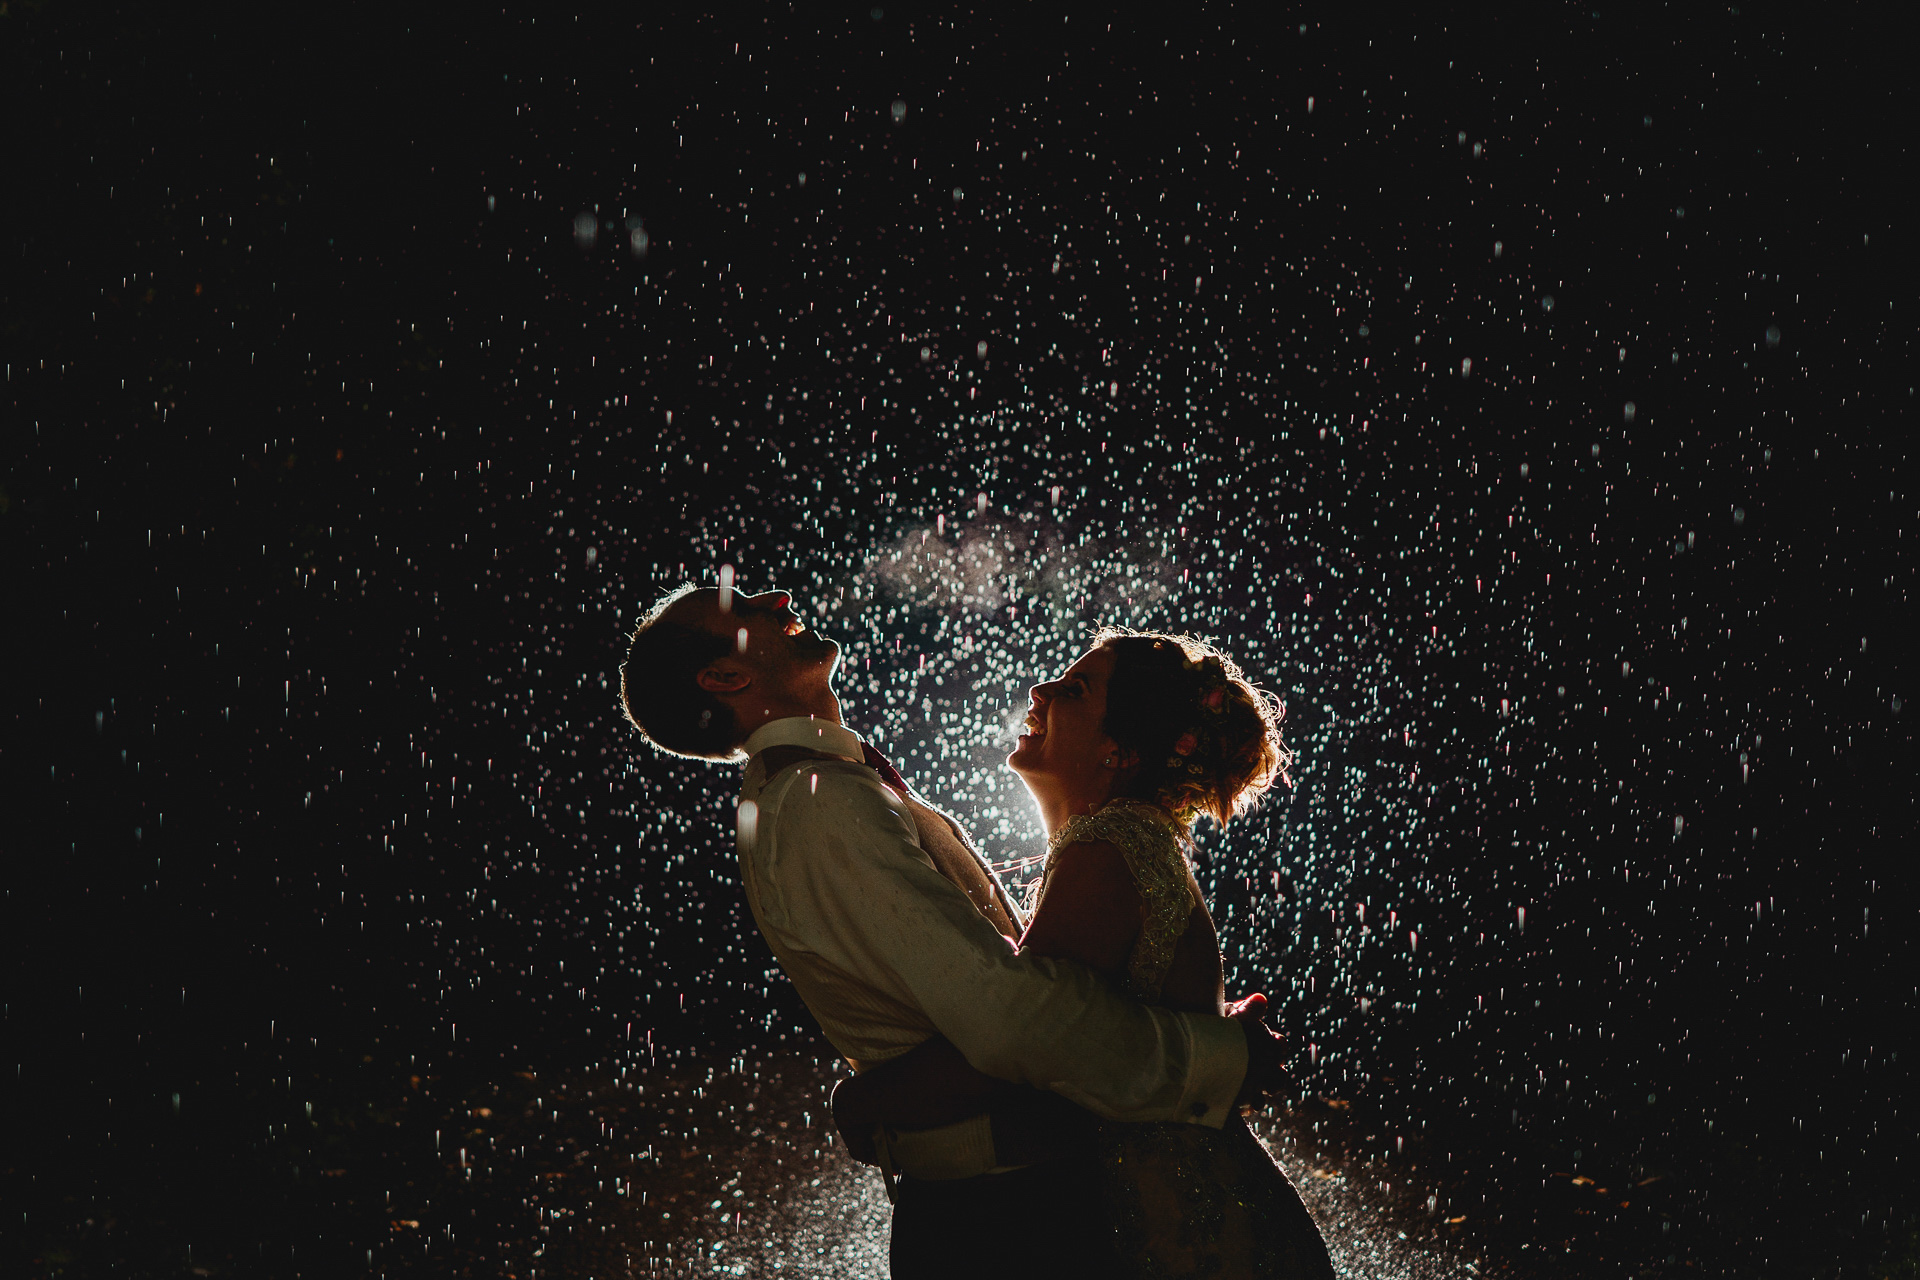 A bride and groom laughing together in the rain